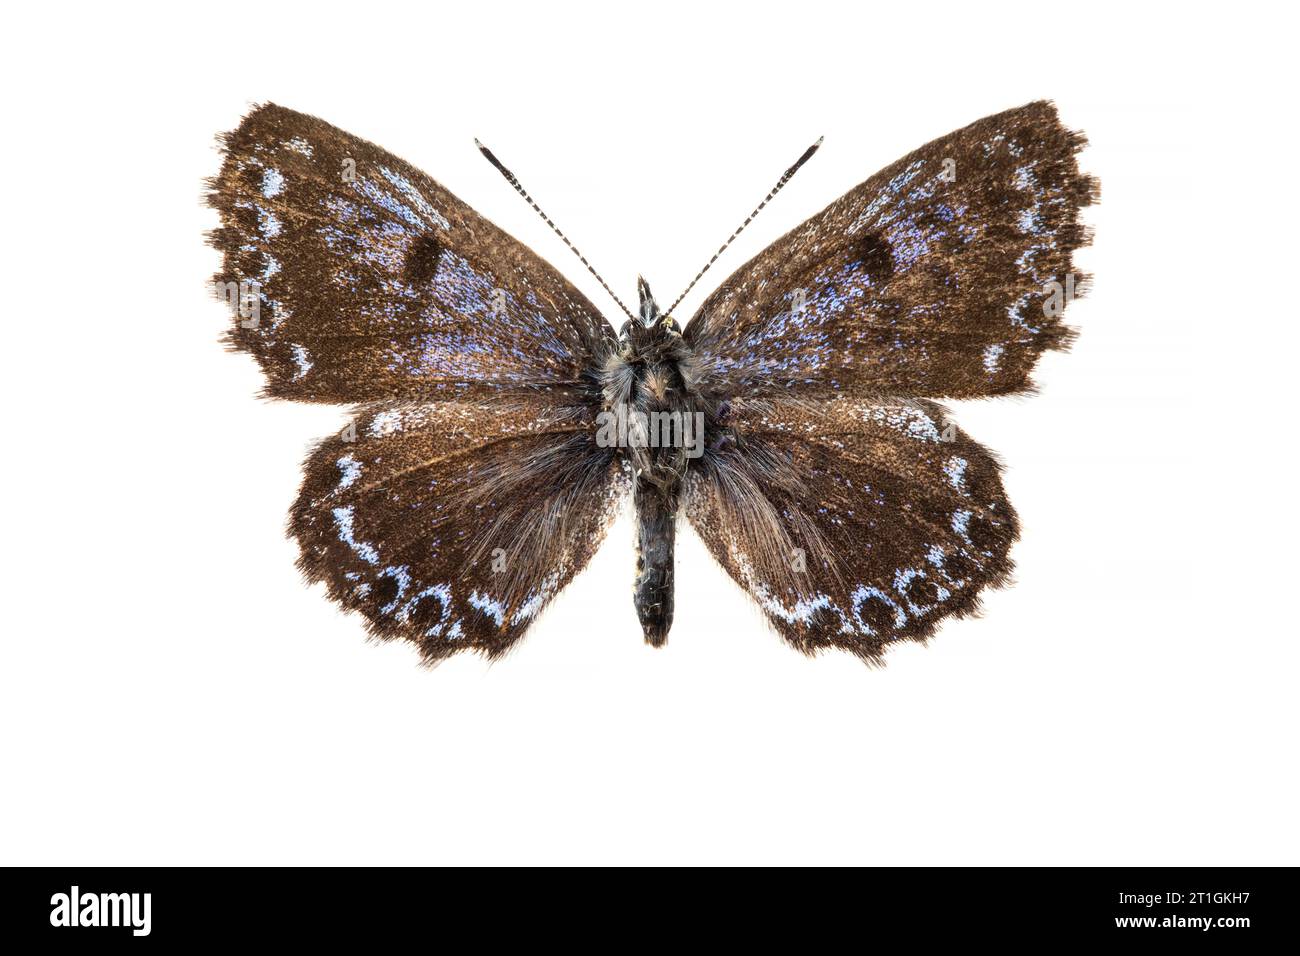 chequered blue (Scolitantides orion, Scolitantides ultraornata), male, upper side, cut out Stock Photo